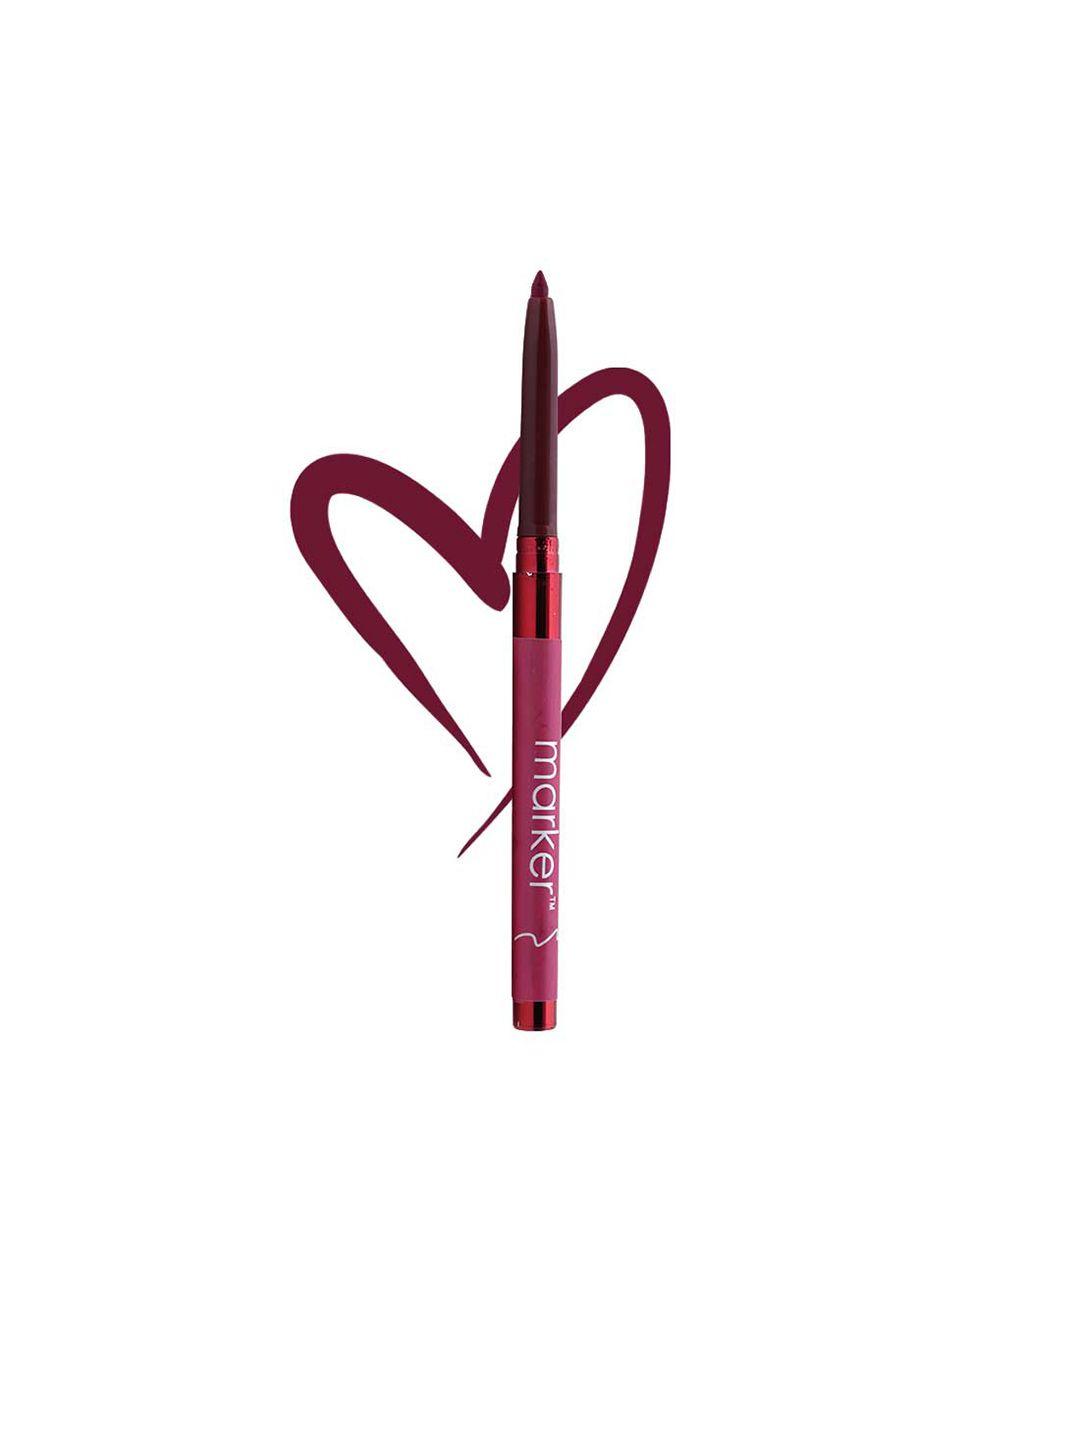 beautyrelay london outline the lips long-lasting lip liner with vitamin e 0.27g - country red